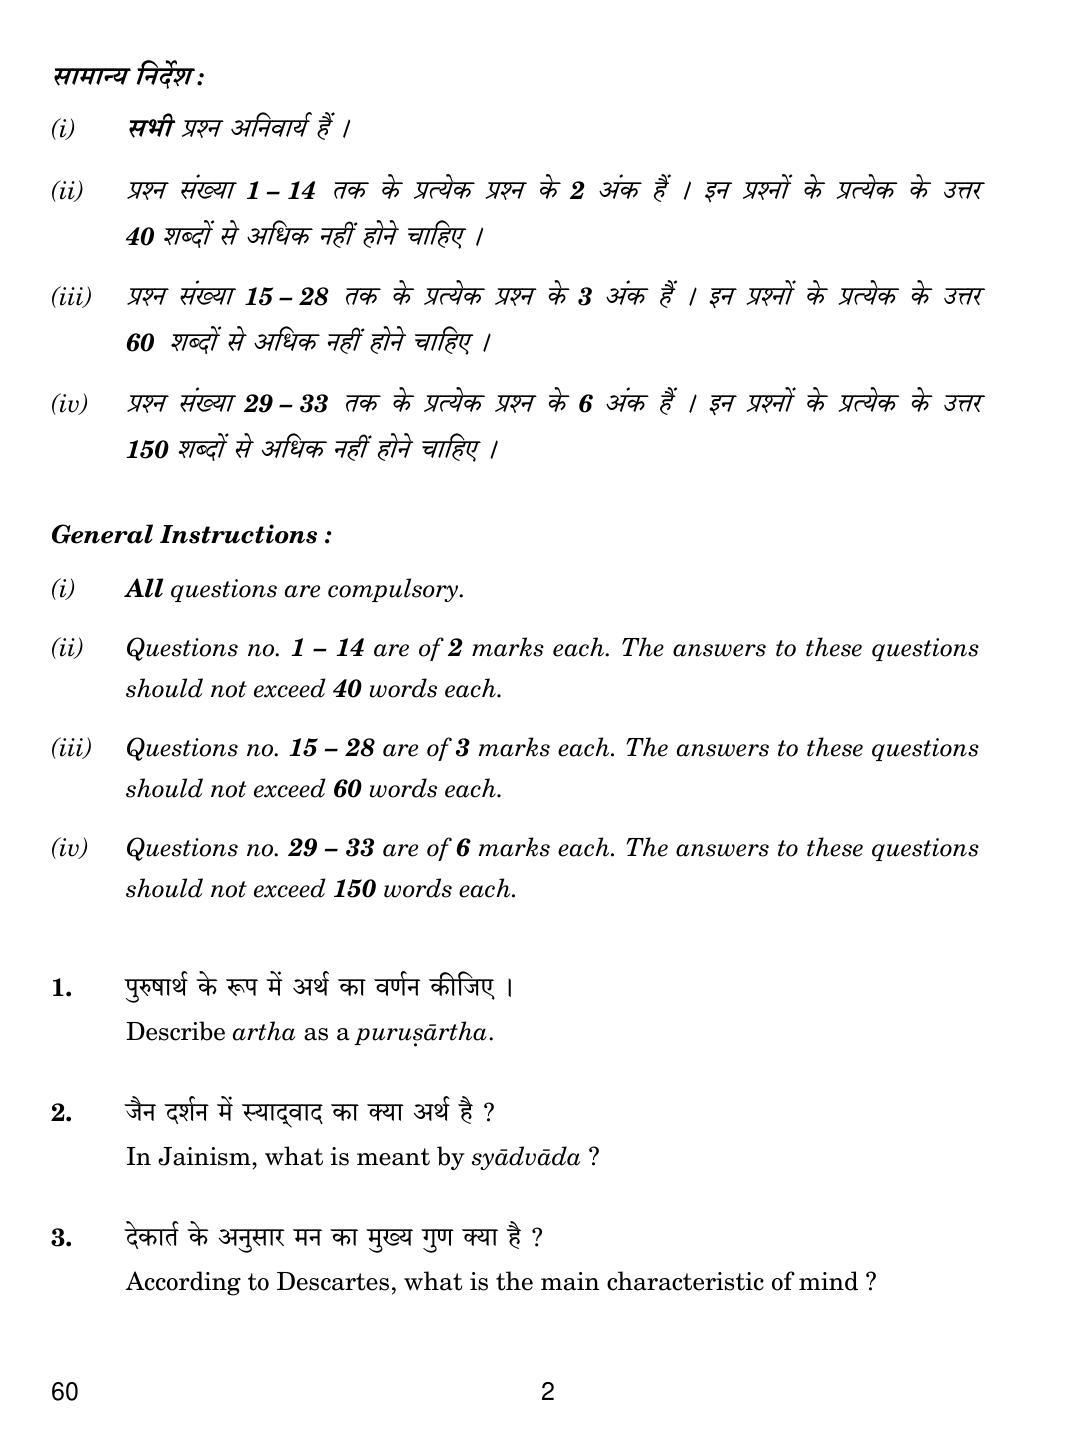 CBSE Class 12 60 Philosophy 2019 Question Paper - Page 2